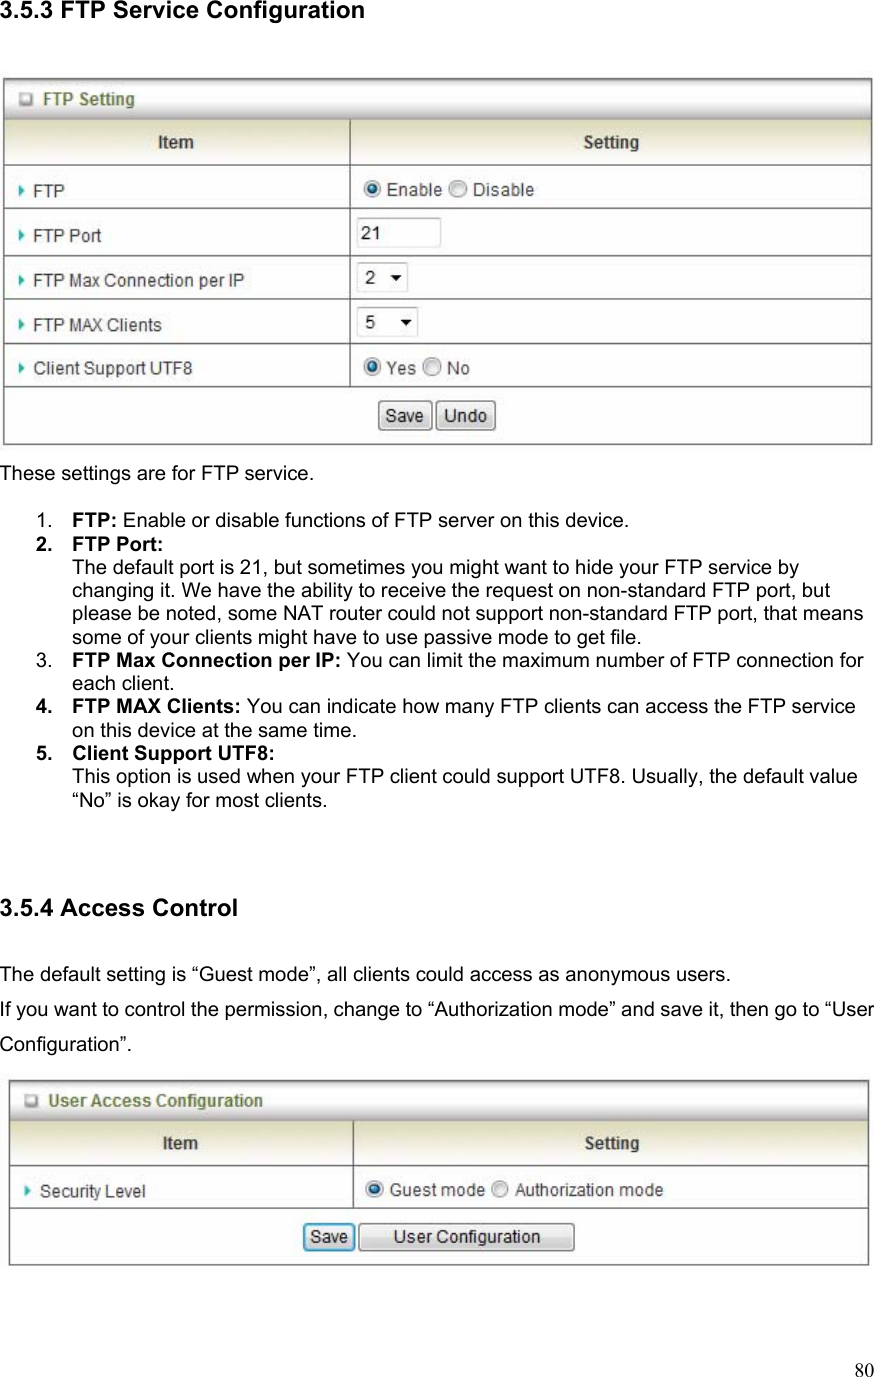  803.5.3 FTP Service Configuration   These settings are for FTP service.  1.  FTP: Enable or disable functions of FTP server on this device. 2. FTP Port: The default port is 21, but sometimes you might want to hide your FTP service by changing it. We have the ability to receive the request on non-standard FTP port, but please be noted, some NAT router could not support non-standard FTP port, that means some of your clients might have to use passive mode to get file. 3.  FTP Max Connection per IP: You can limit the maximum number of FTP connection for each client. 4. FTP MAX Clients: You can indicate how many FTP clients can access the FTP service on this device at the same time.   5.  Client Support UTF8: This option is used when your FTP client could support UTF8. Usually, the default value “No” is okay for most clients.   3.5.4 Access Control  The default setting is “Guest mode”, all clients could access as anonymous users. If you want to control the permission, change to “Authorization mode” and save it, then go to “User Configuration”.   